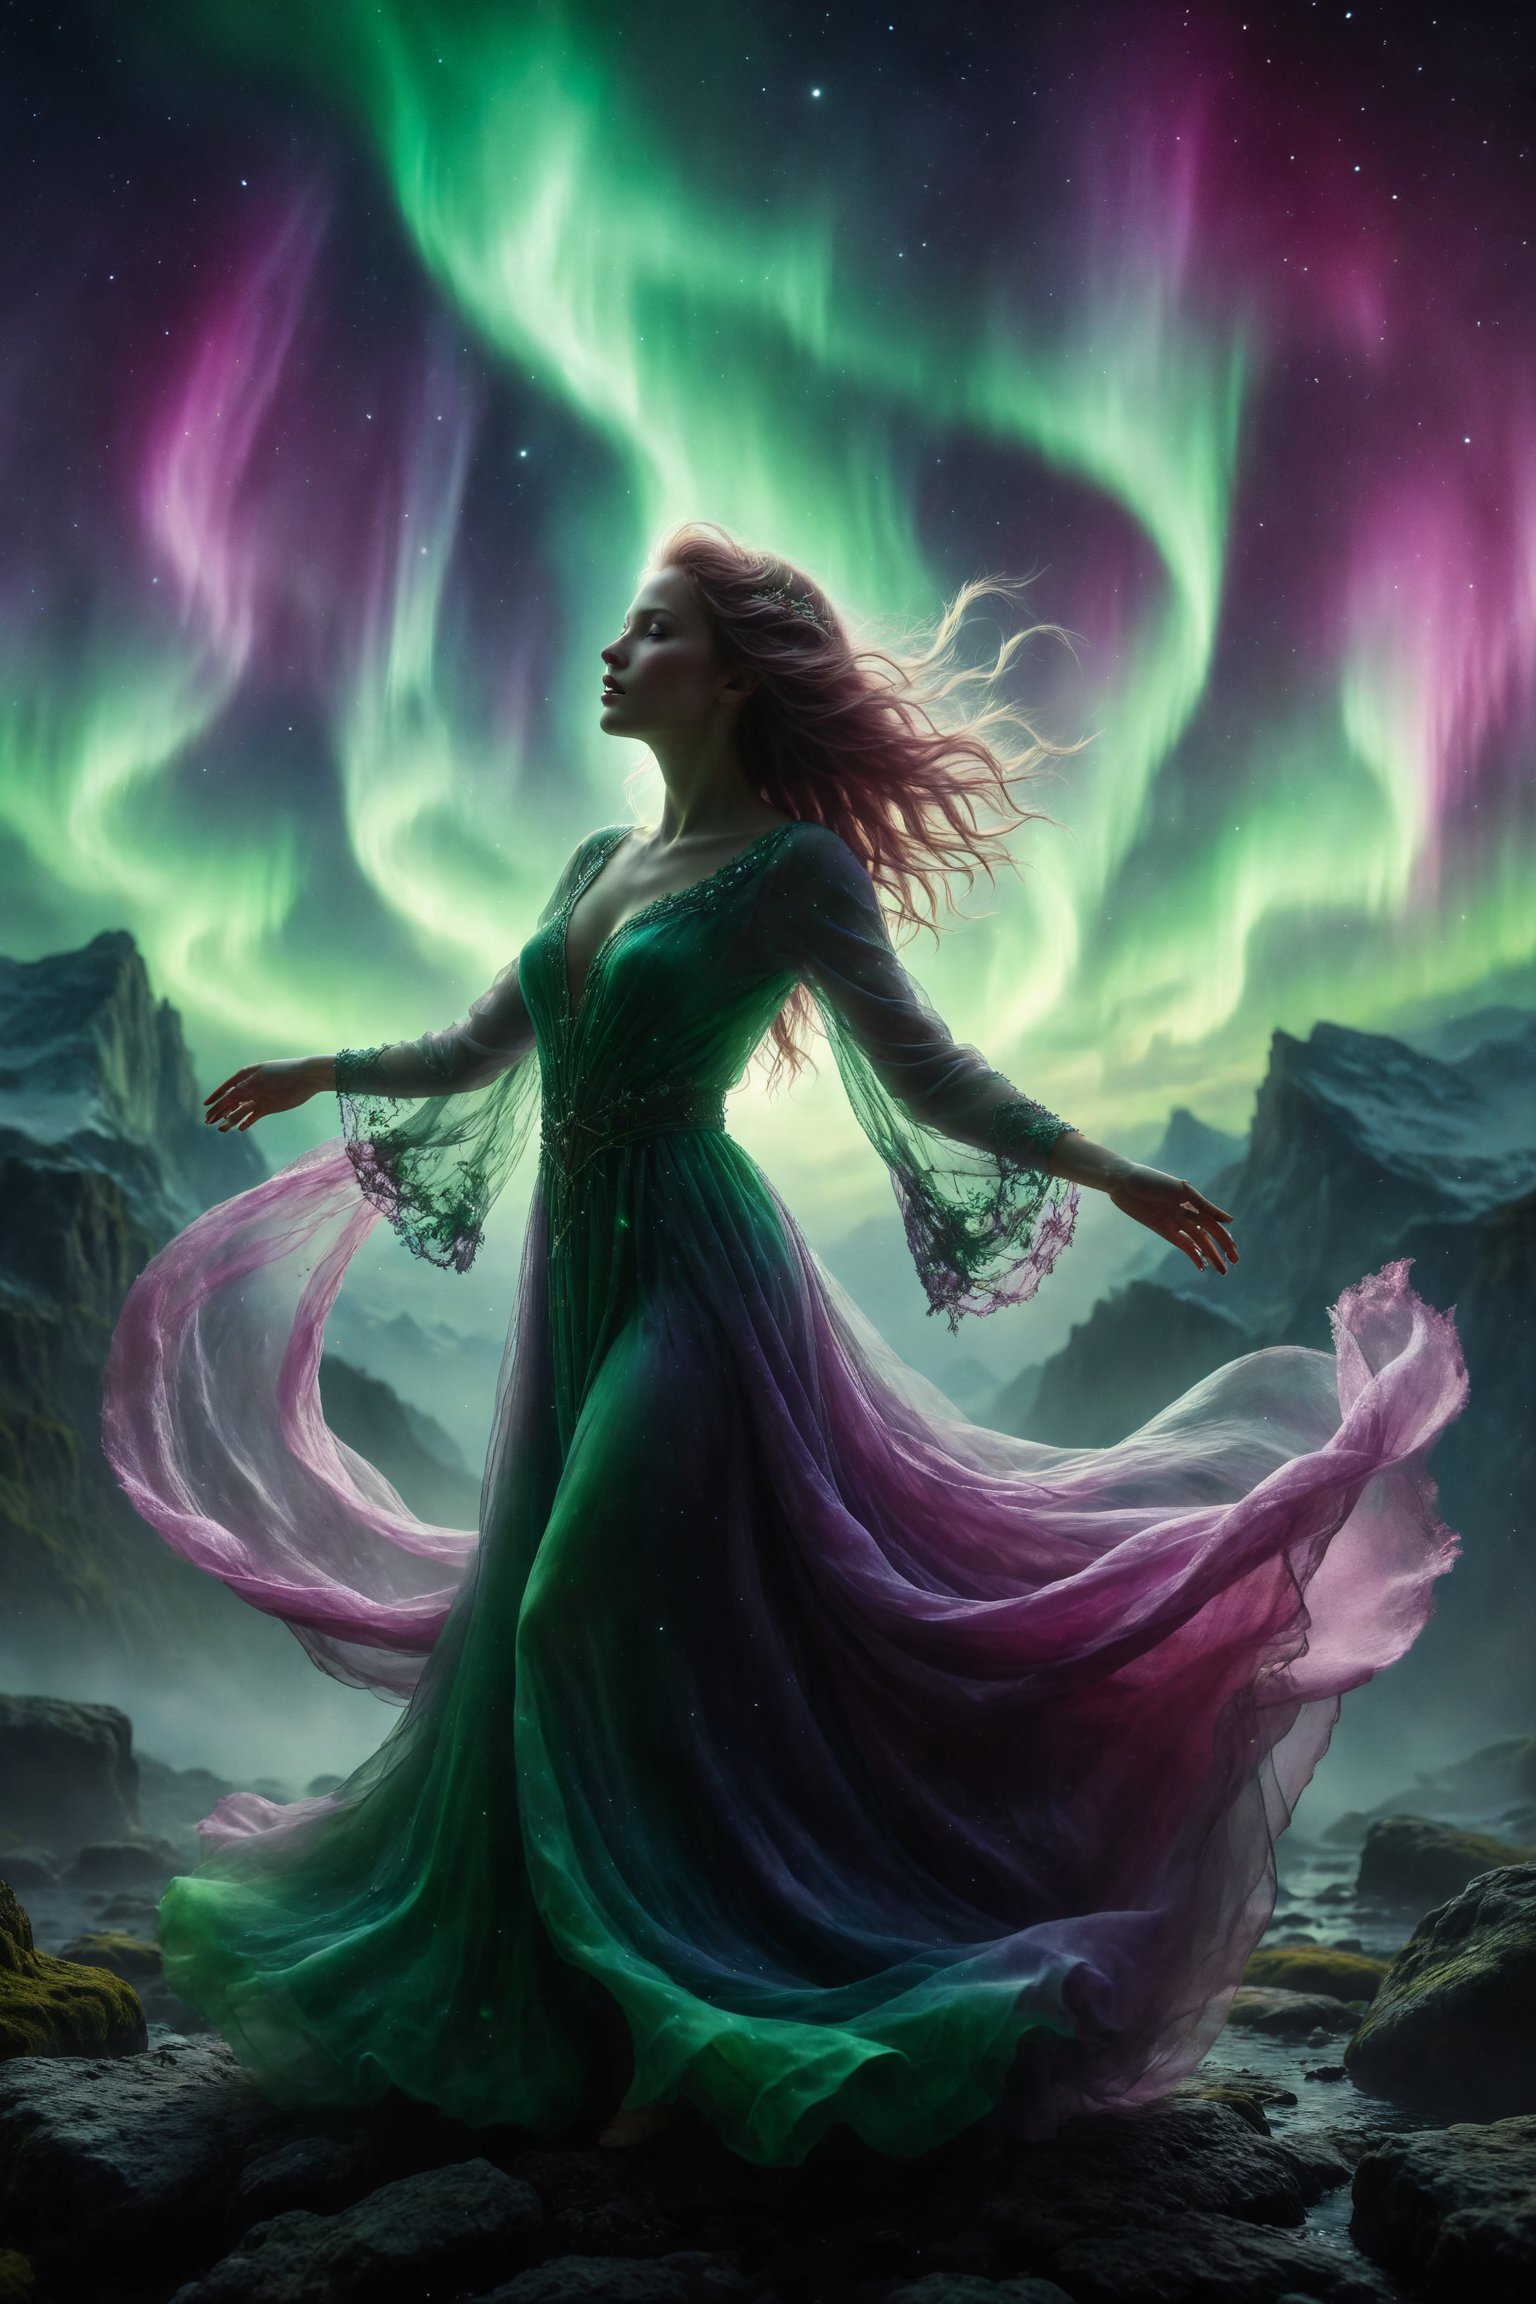 Queen of Northern Lights Aurora dances across the sky in shimmering robes of greens, purples, and pinks, with hair that glows like the northern lights. Her movements are graceful and mesmerizing.